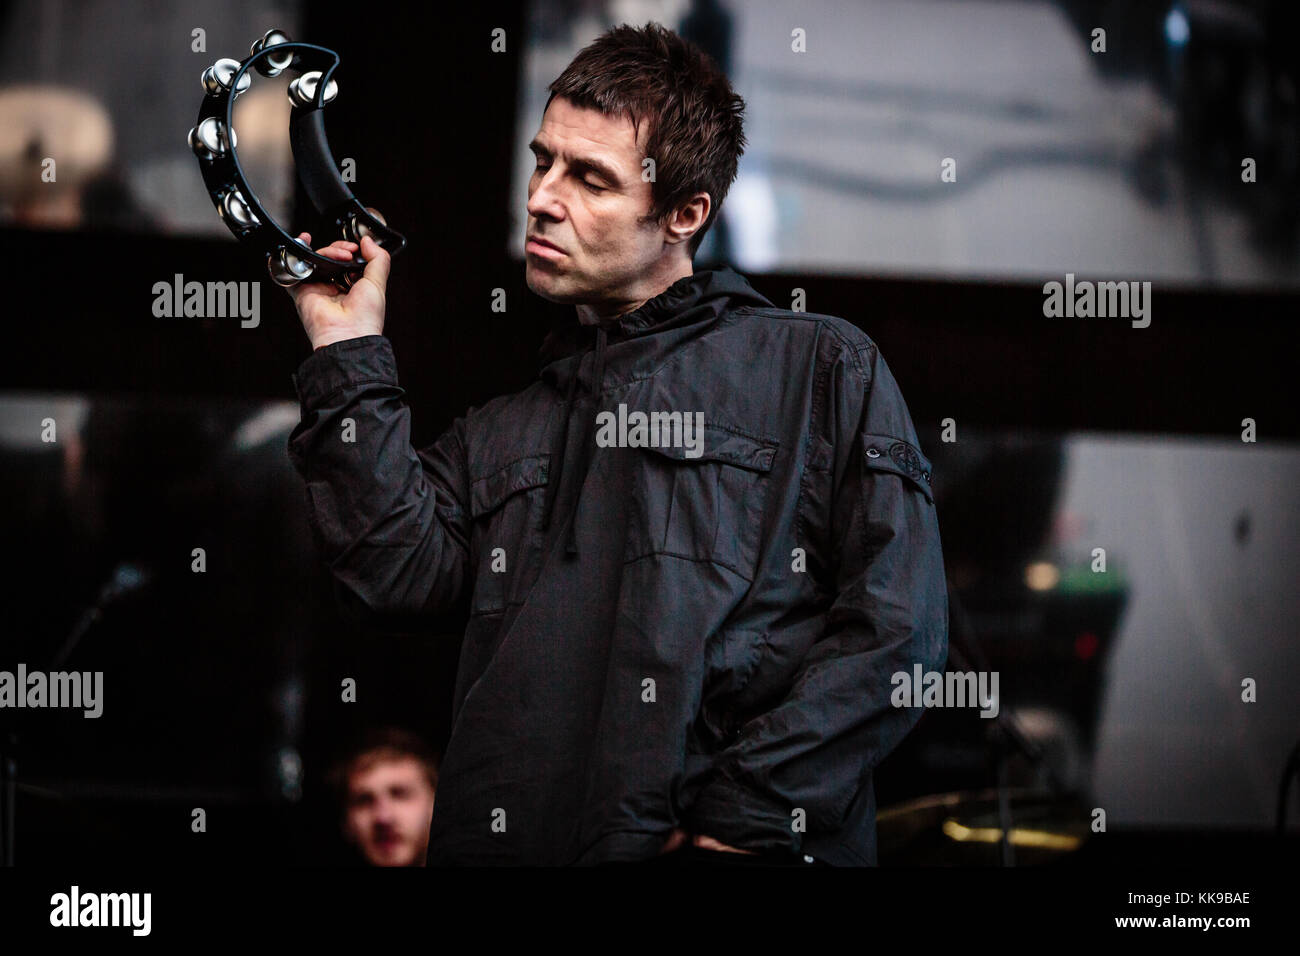 The English singer, songwriter and musician Liam Gallagher performs a ...